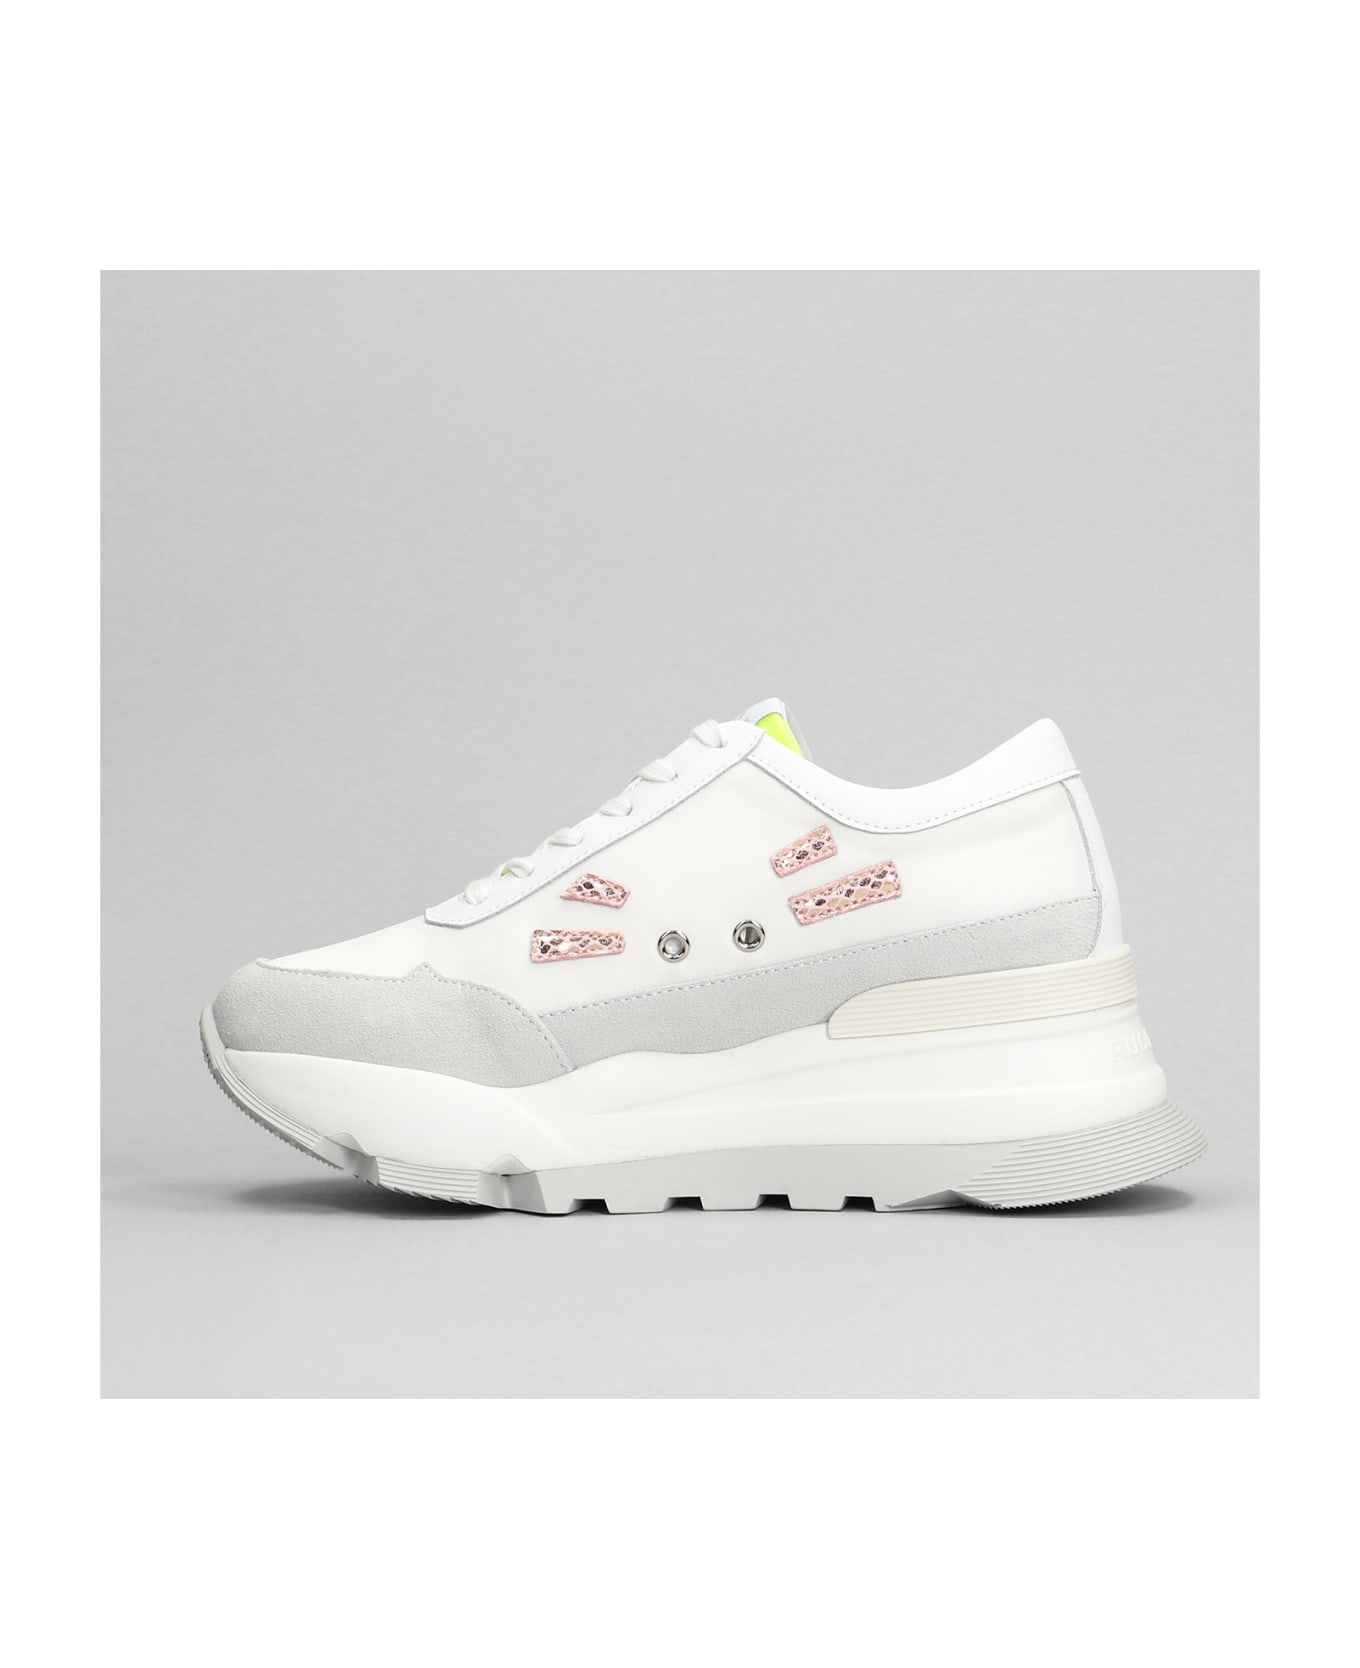 Ruco Line Aki Sneakers In White Suede And Fabric - white スニーカー